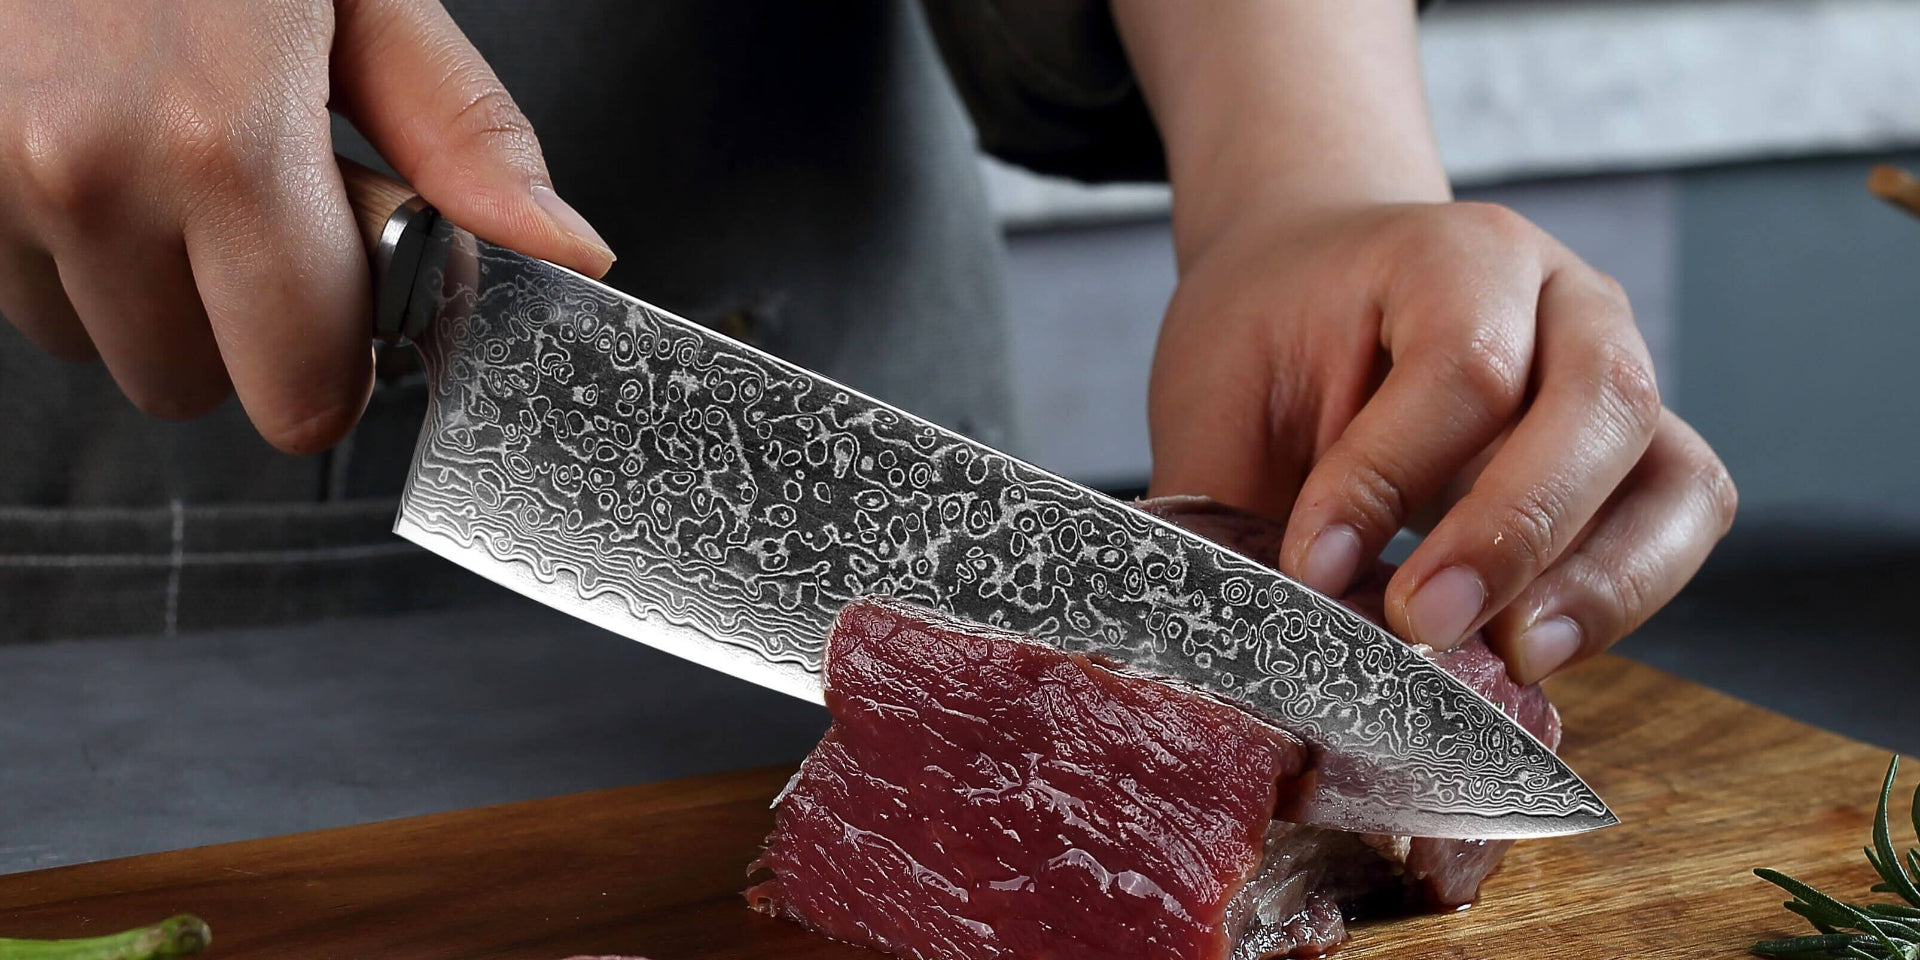 The Ultimate Guide to Maintaining Your Japanese Kitchen Knives